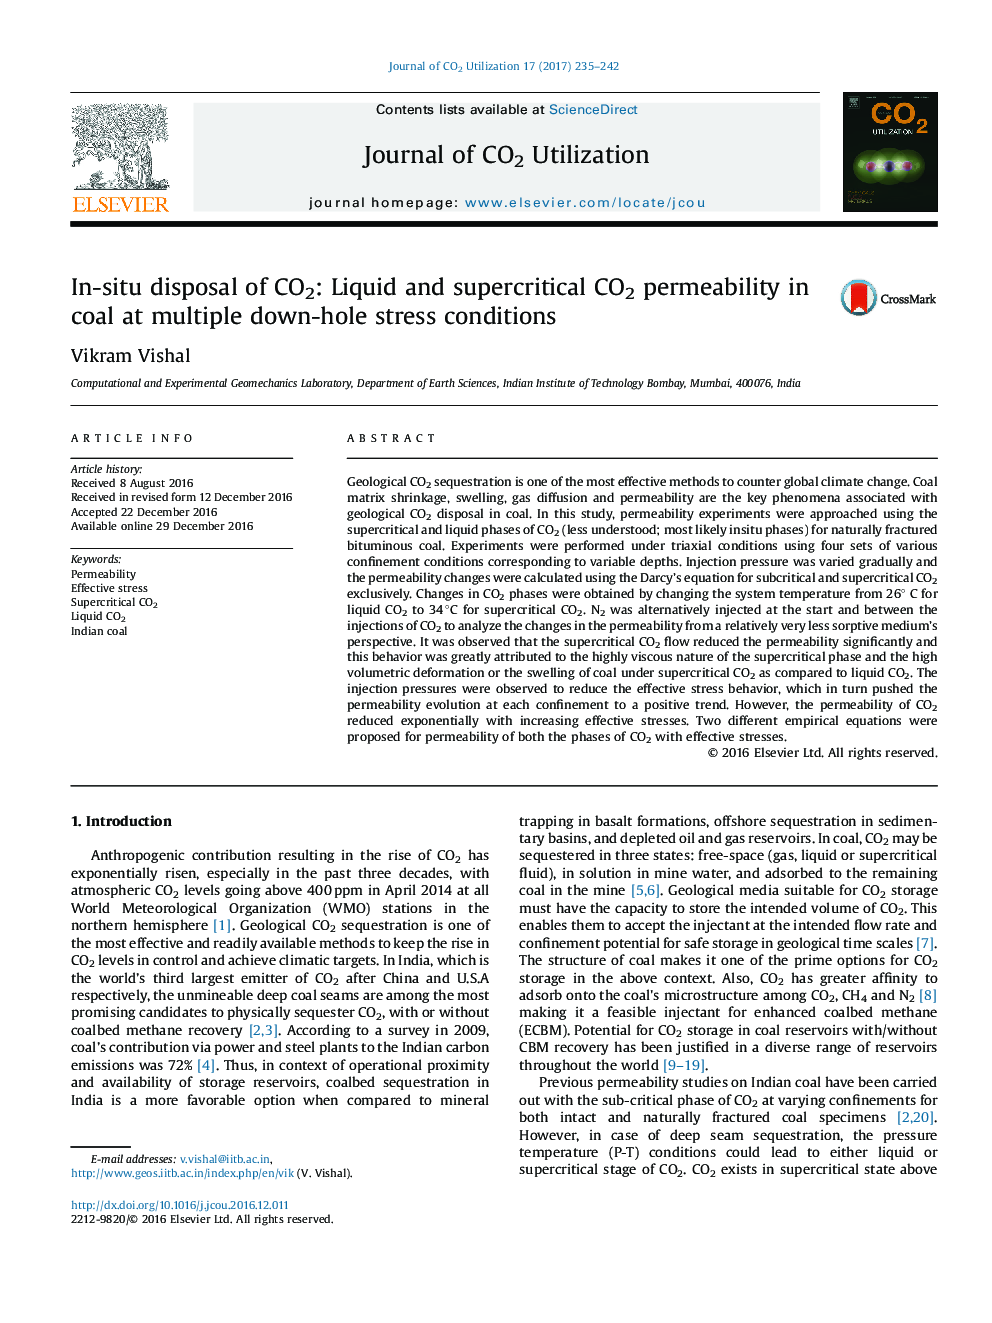 In-situ disposal of CO2: Liquid and supercritical CO2 permeability in coal at multiple down-hole stress conditions